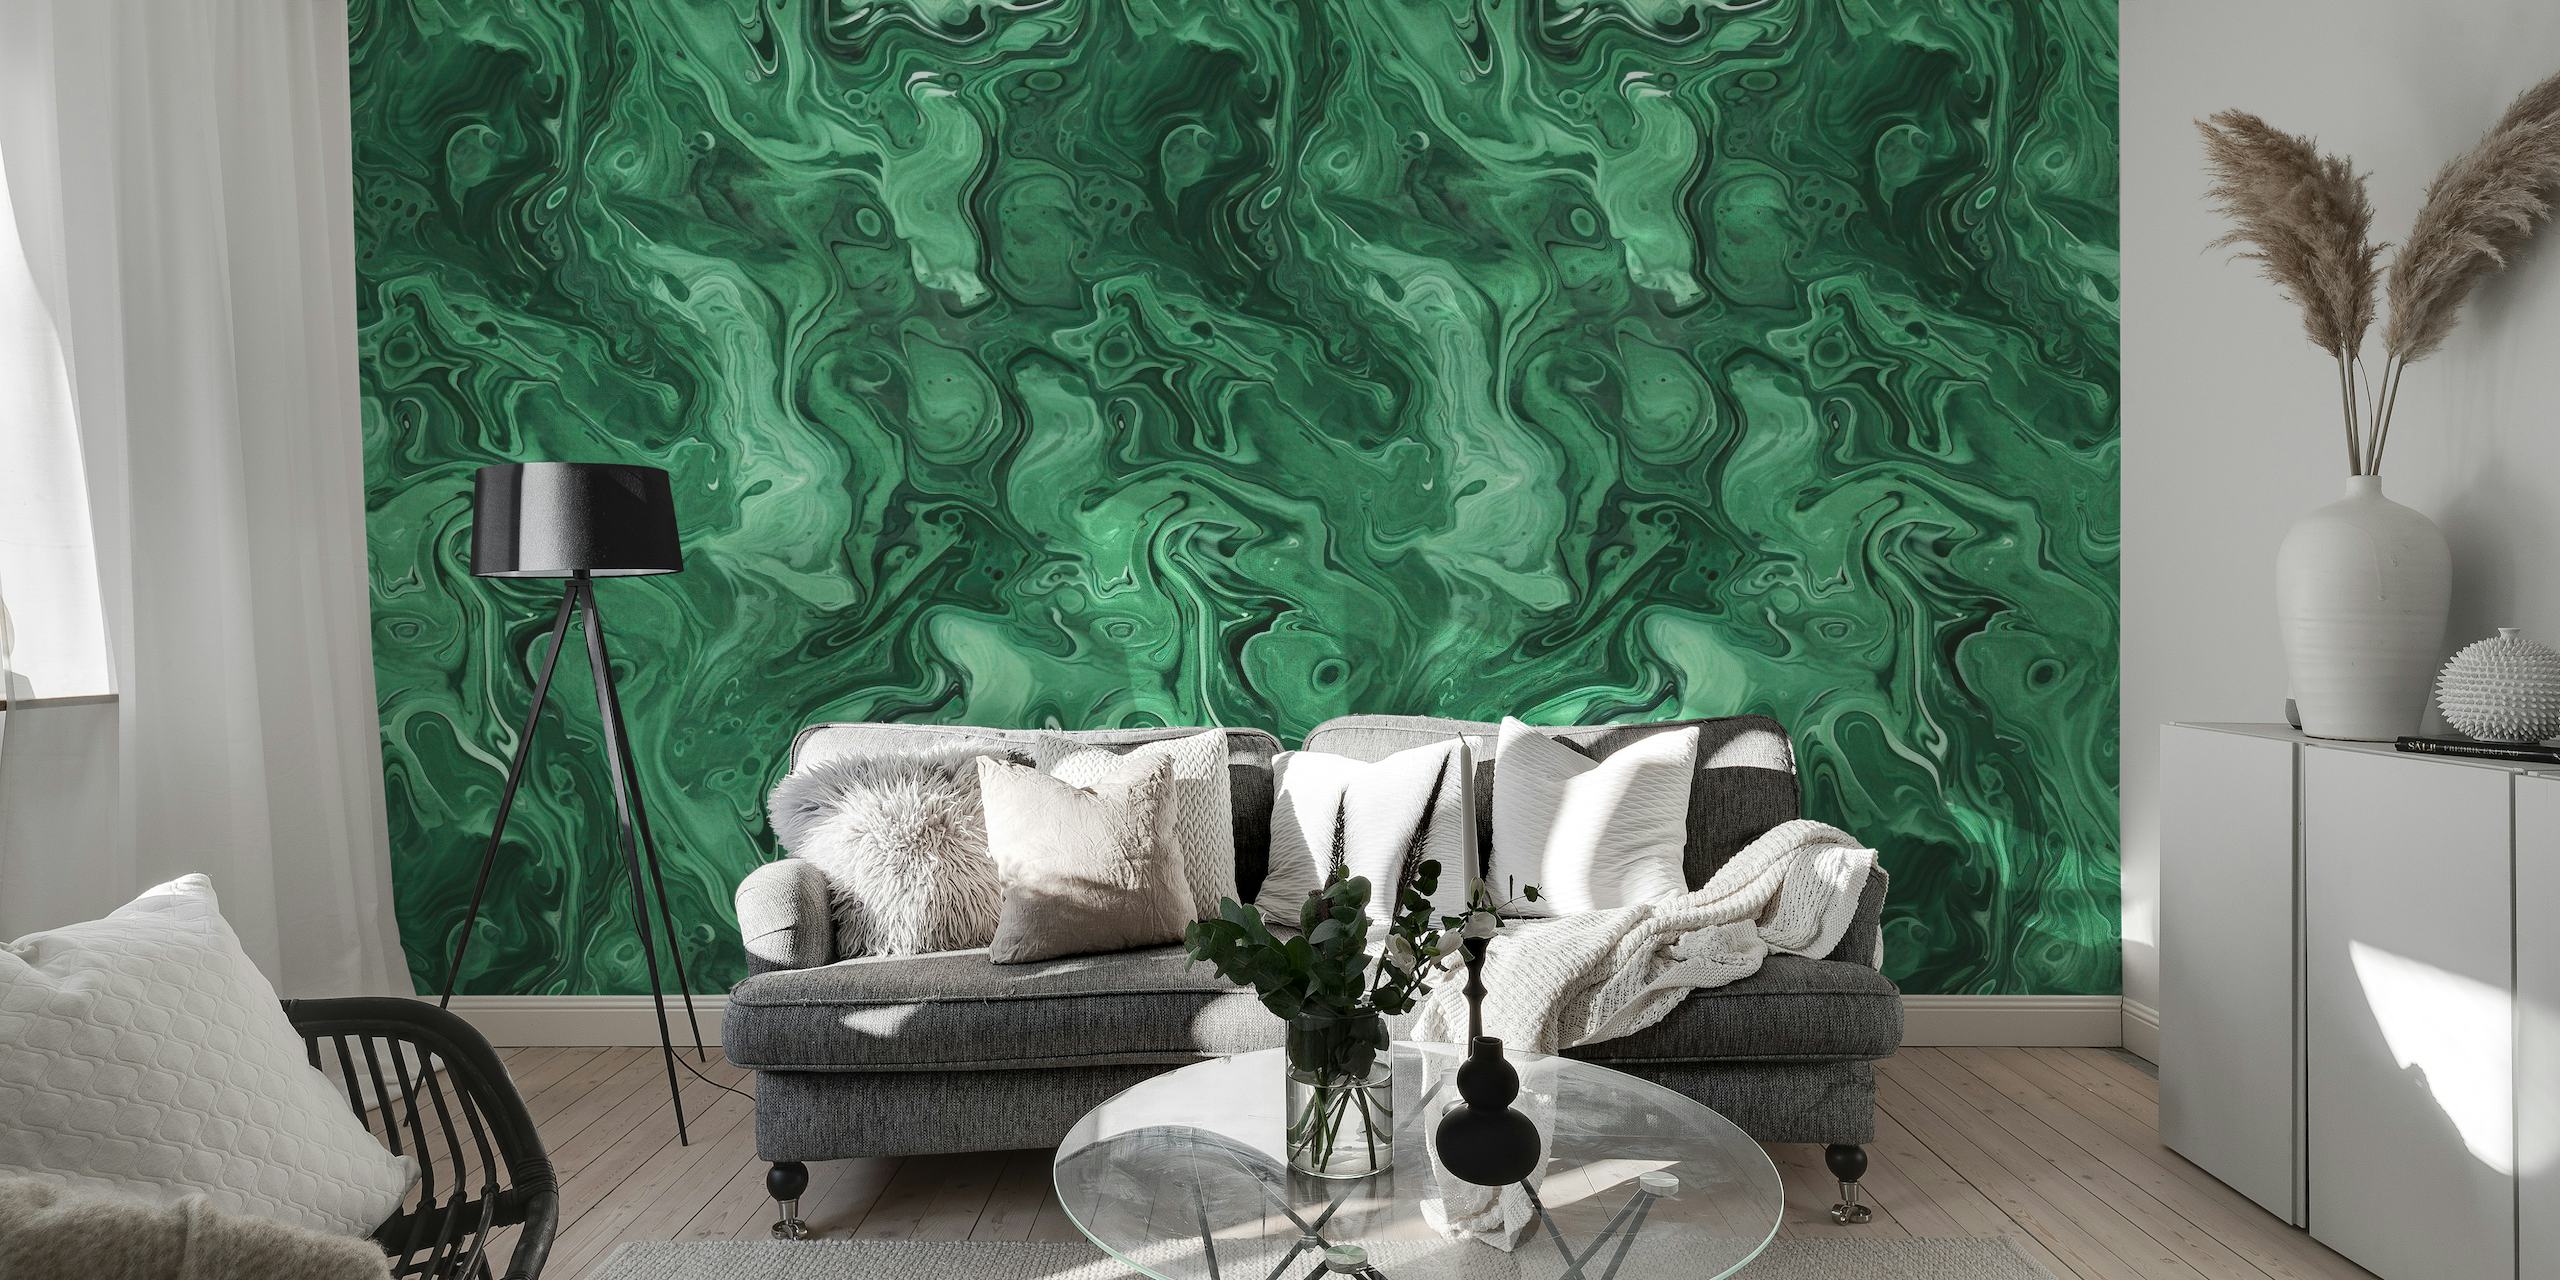 Green Malachite Gem Stone Watercolor wall mural with swirling jade and emerald patterns